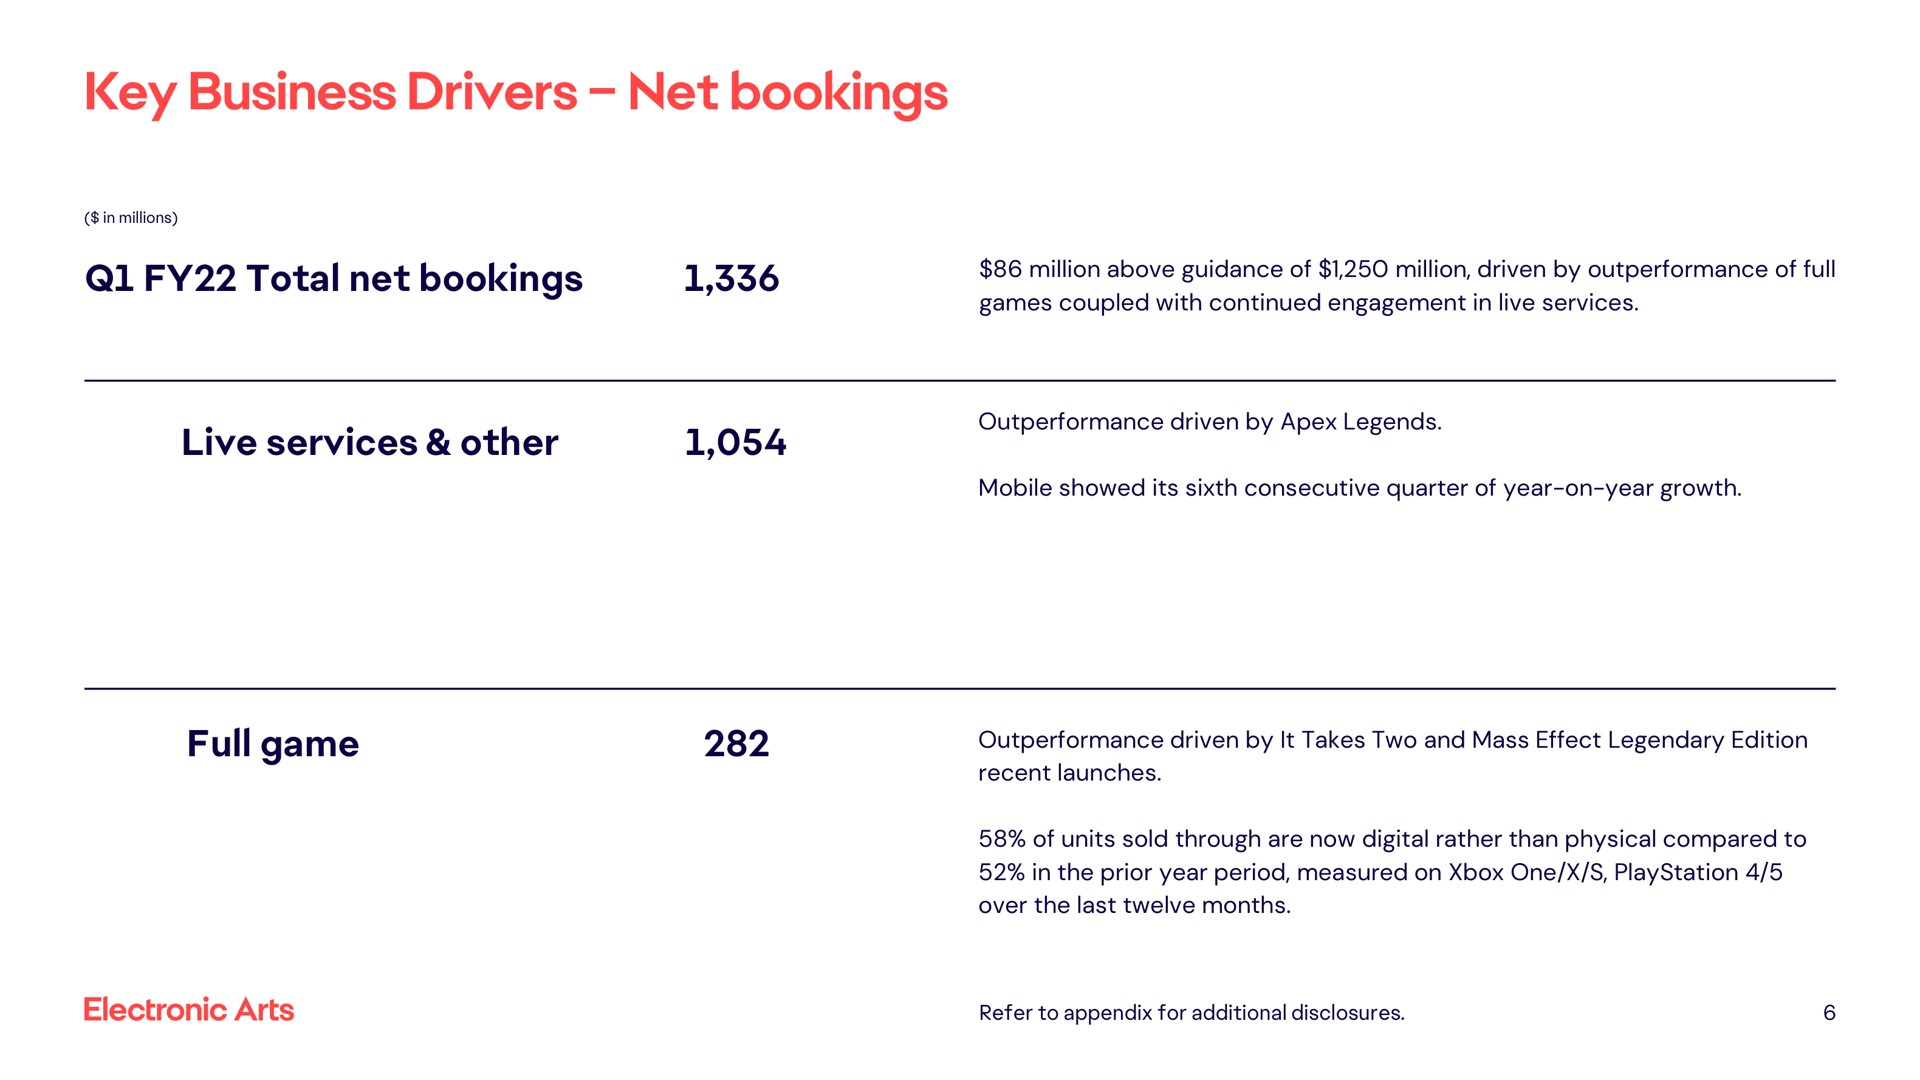 key business drivers net bookings total net bookings live services other full game | Electronic Arts